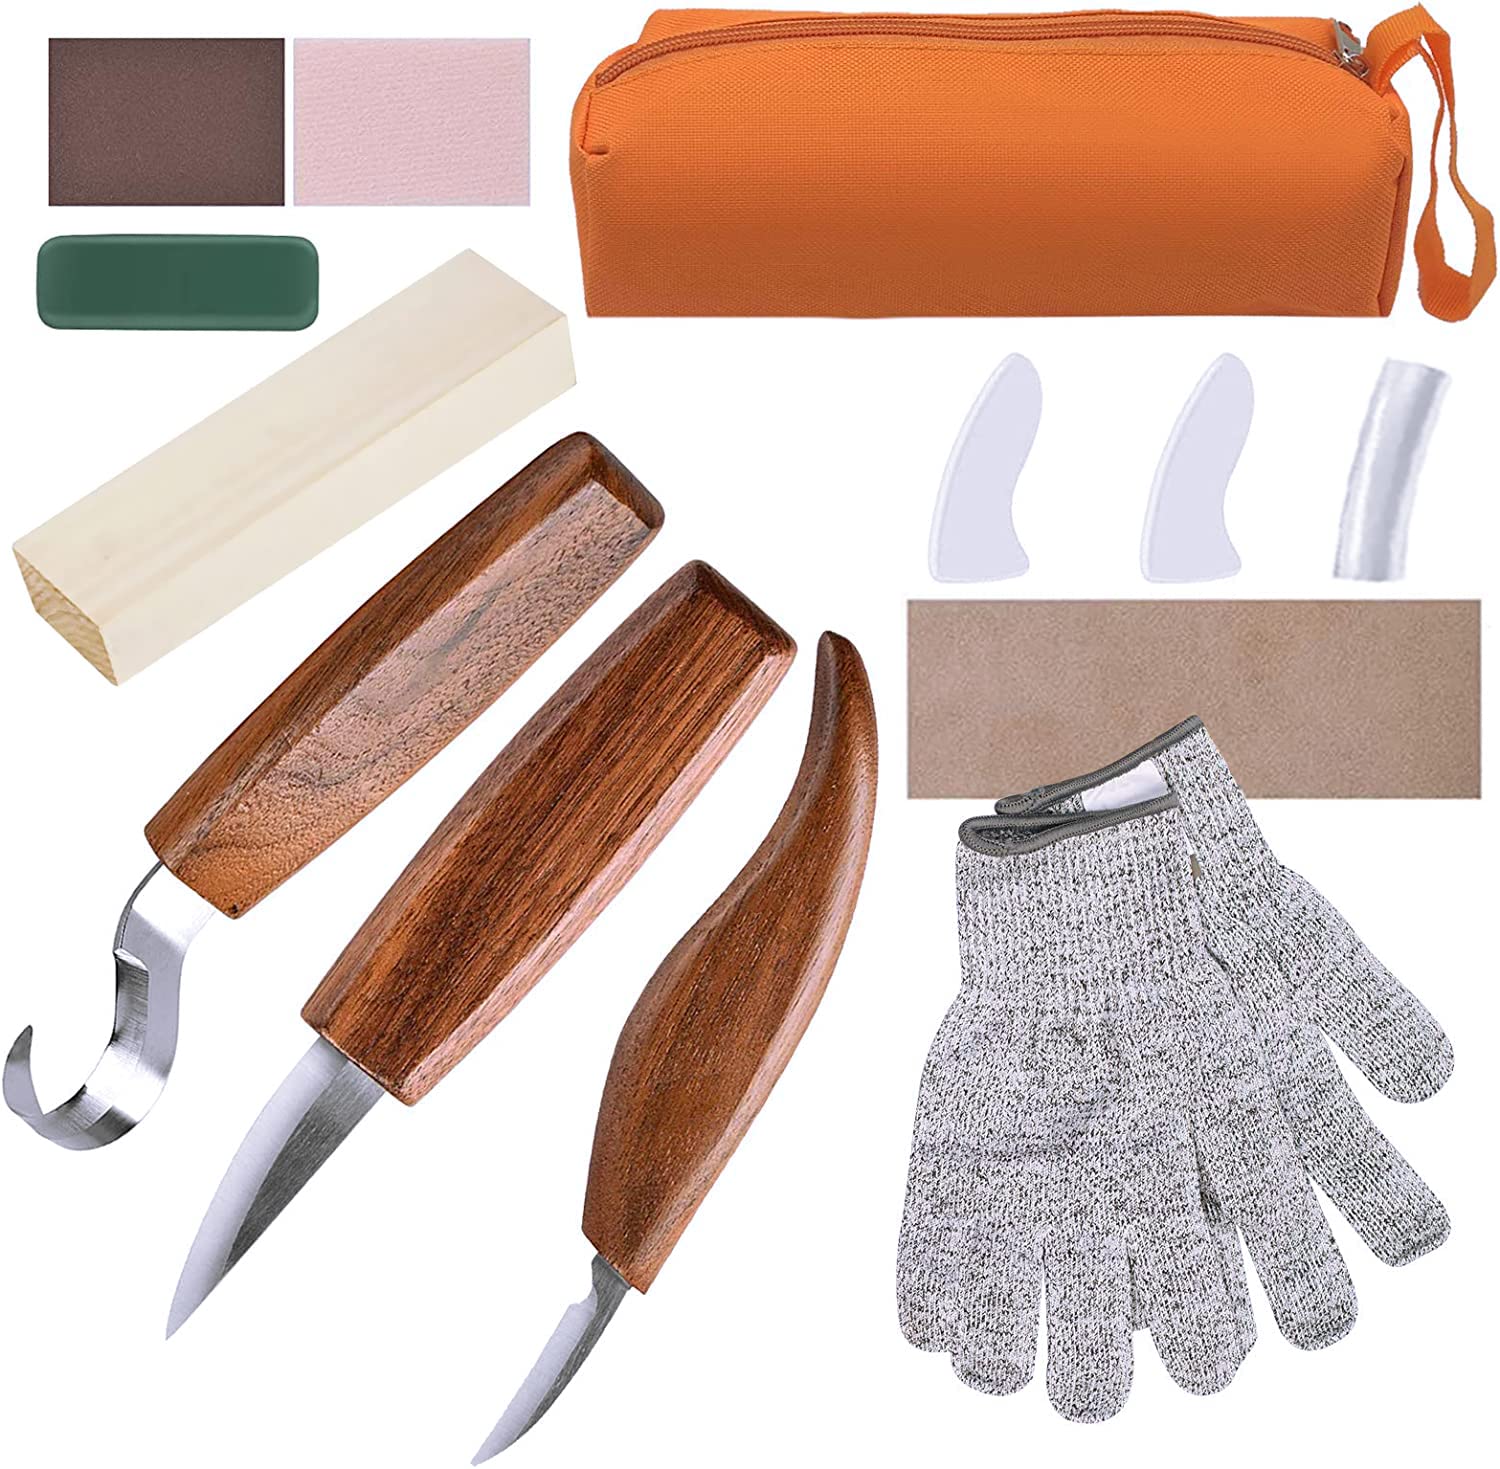 Whittling Gloves, Safety when using a whittling knife